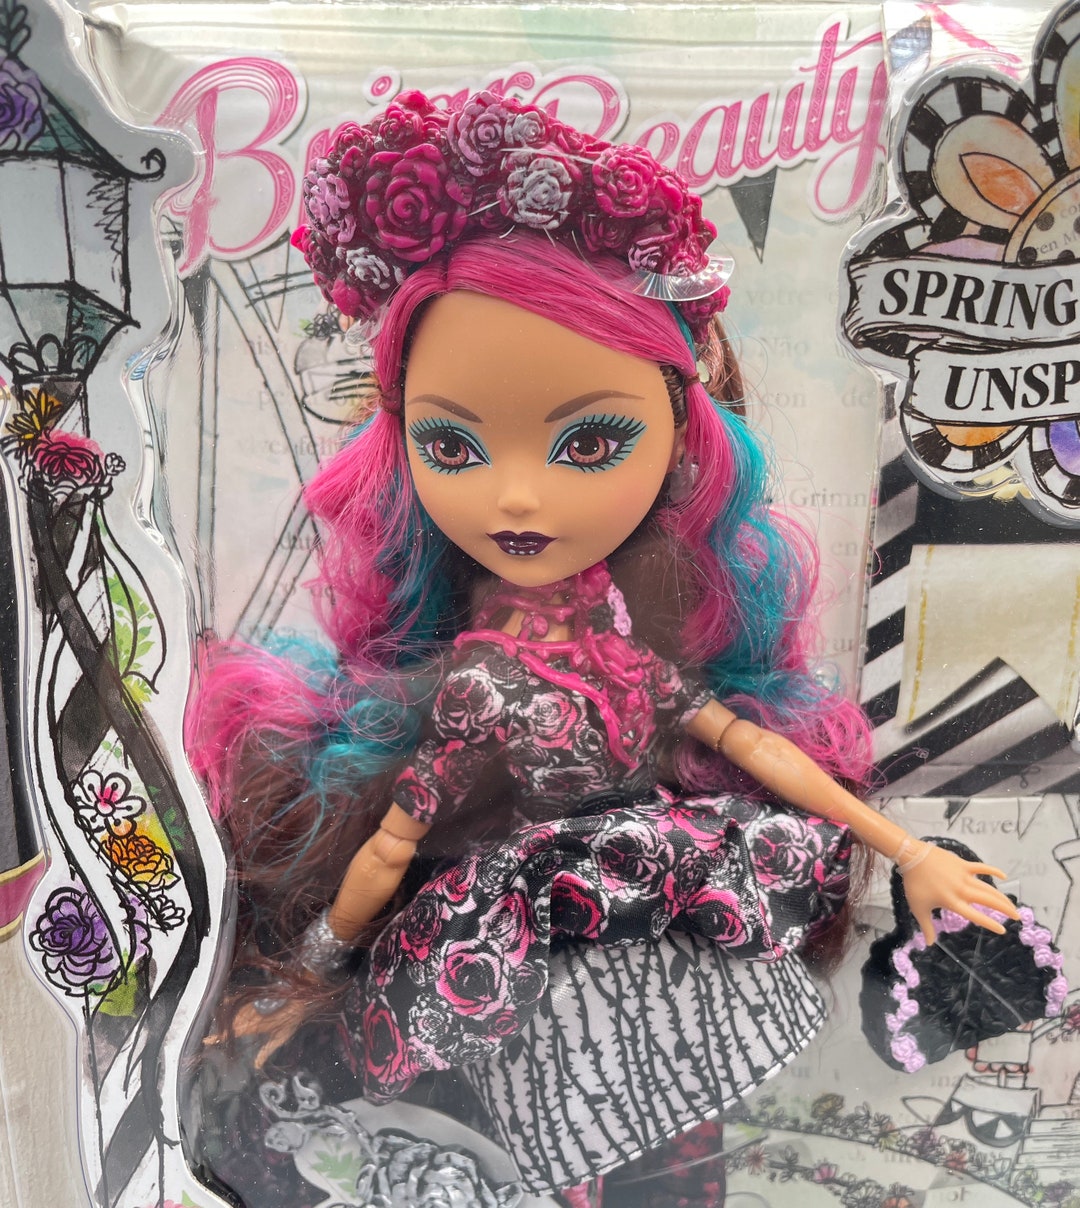 Review BRIAR BEAUTY, SPRING UNSPRUNG